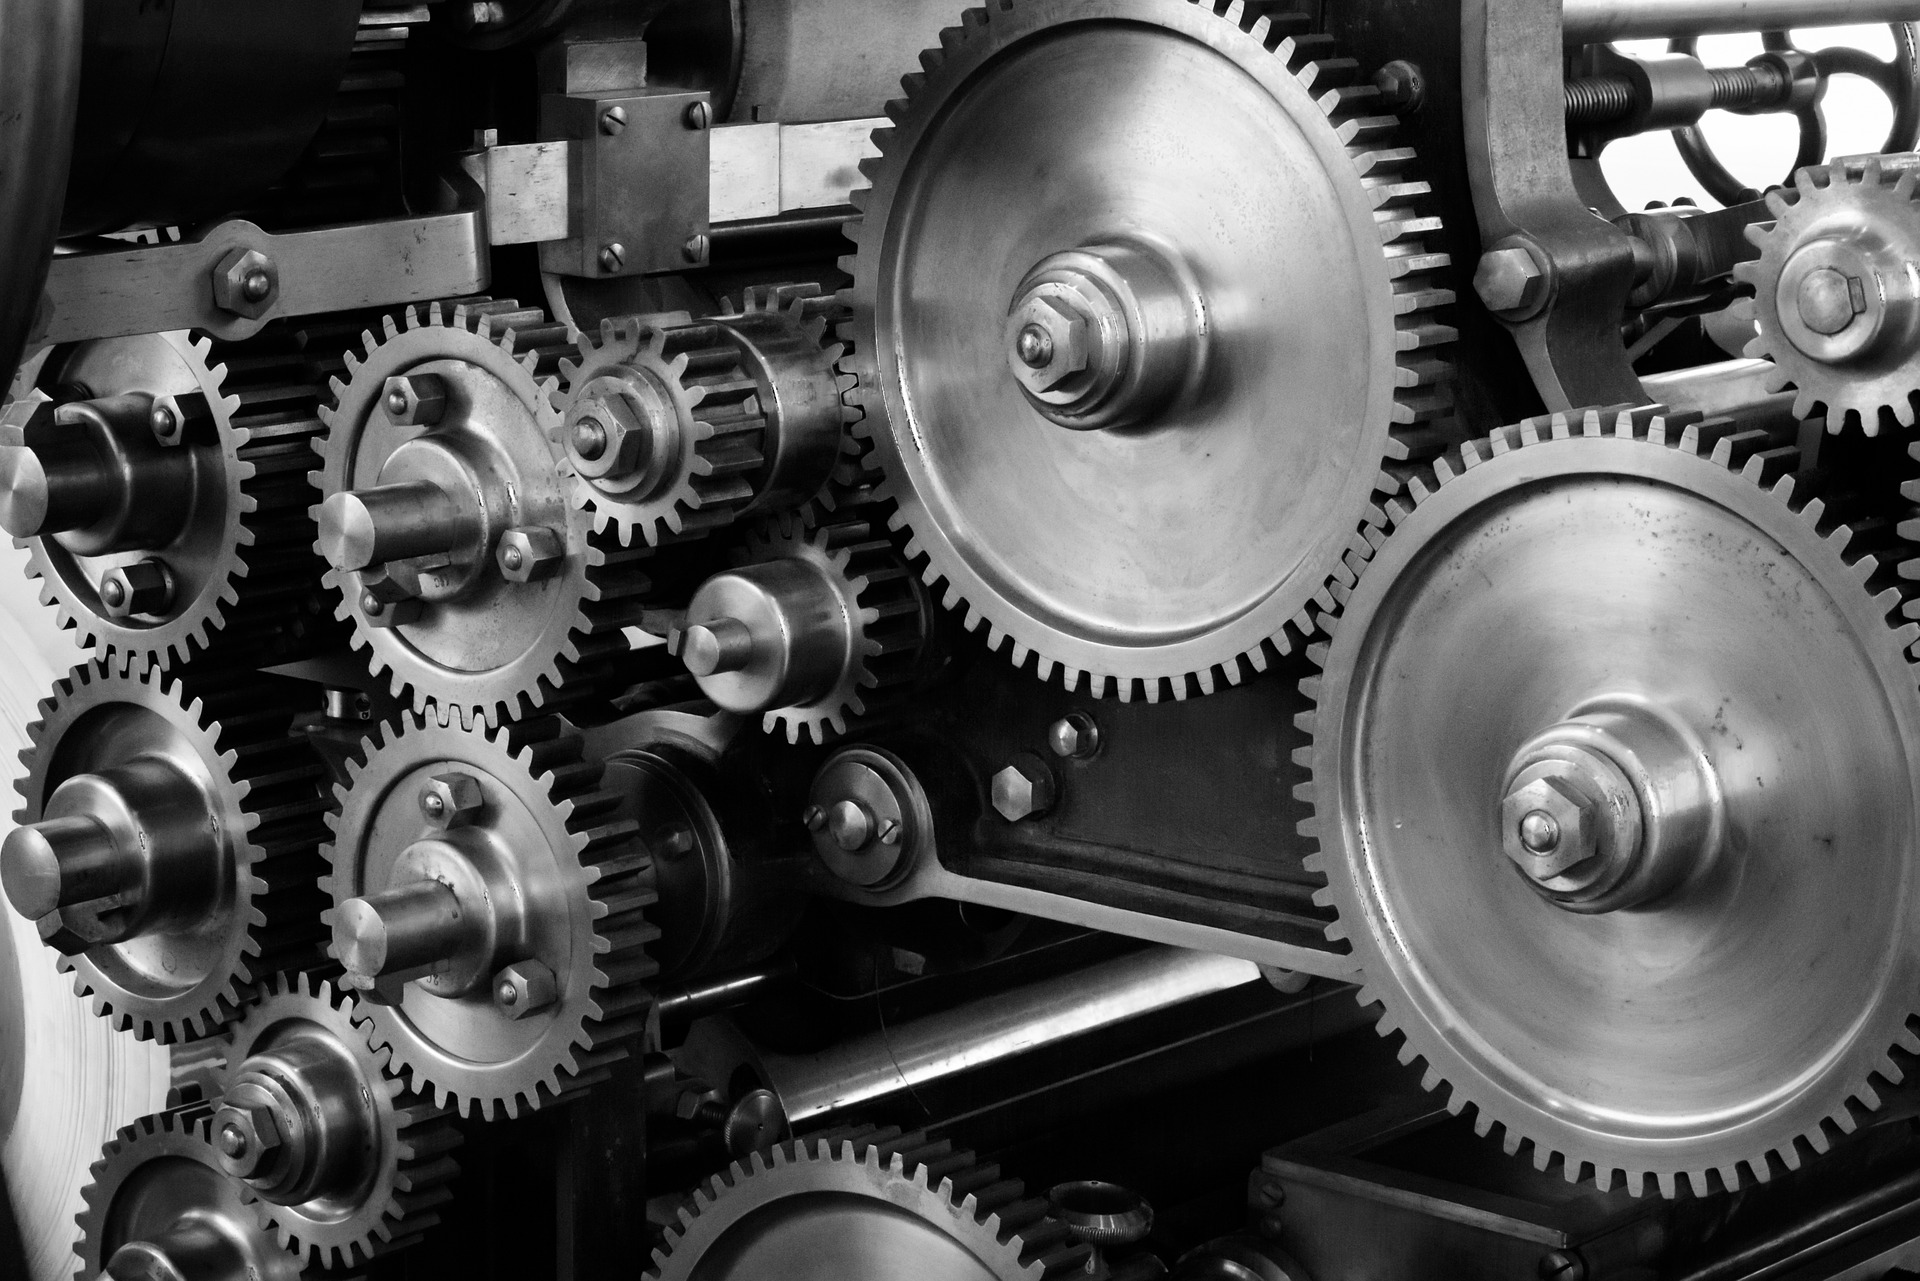 the gears of a large machine are shown in black and white